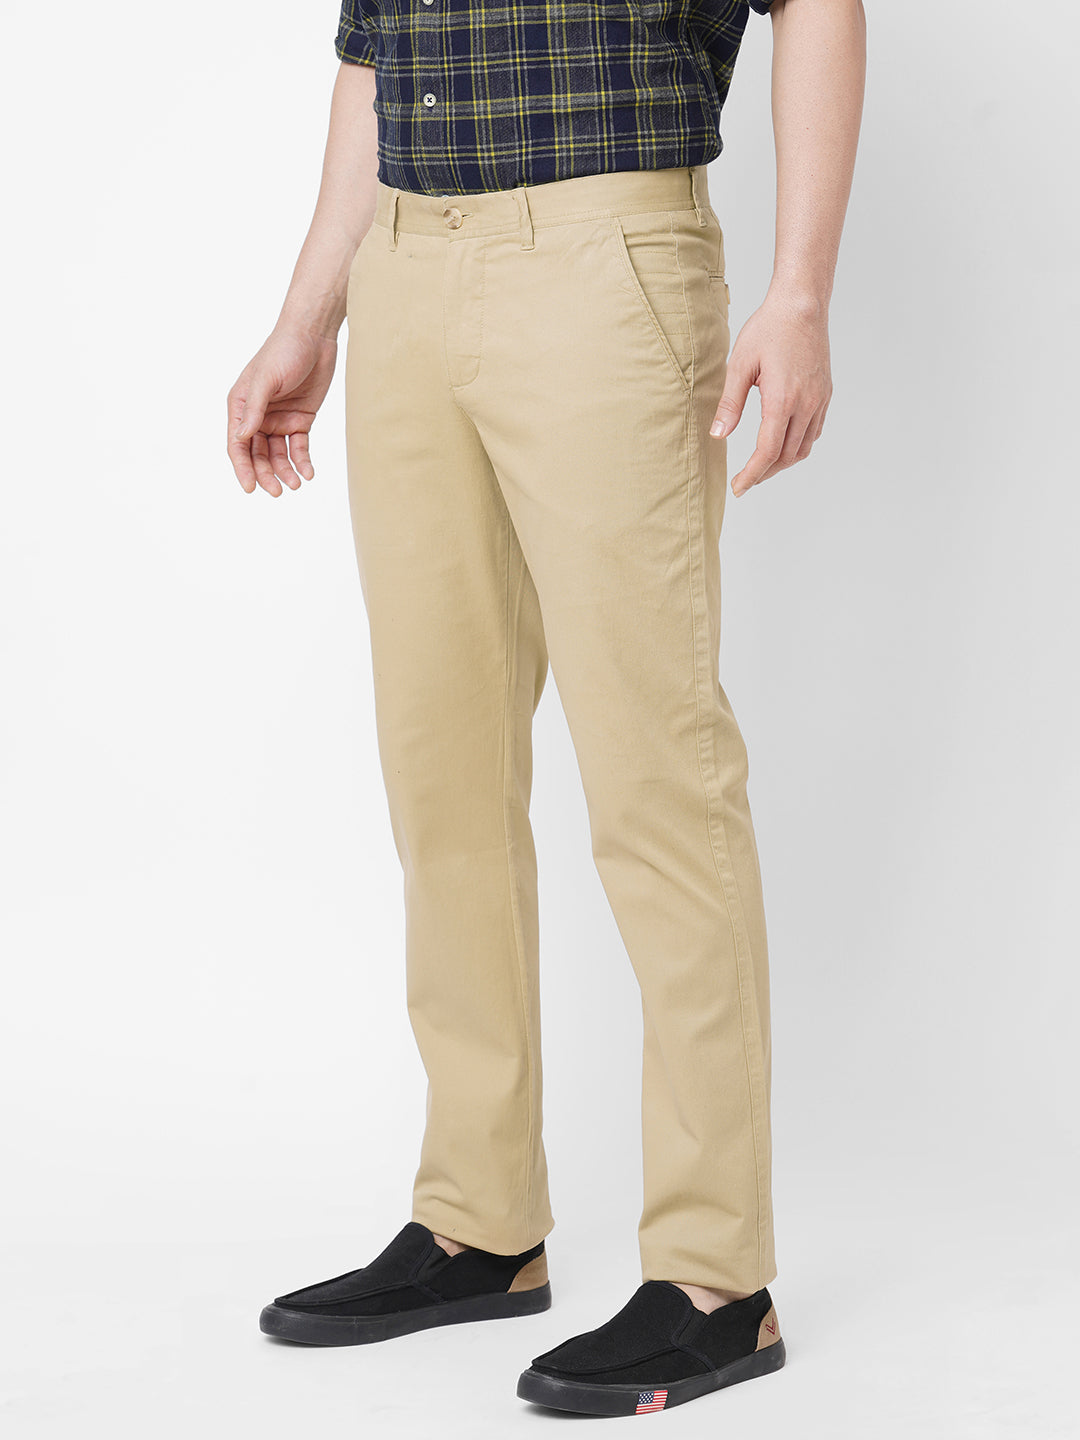 Off-White Pleated Duca Pants in Pure Cotton | SUITSUPPLY US